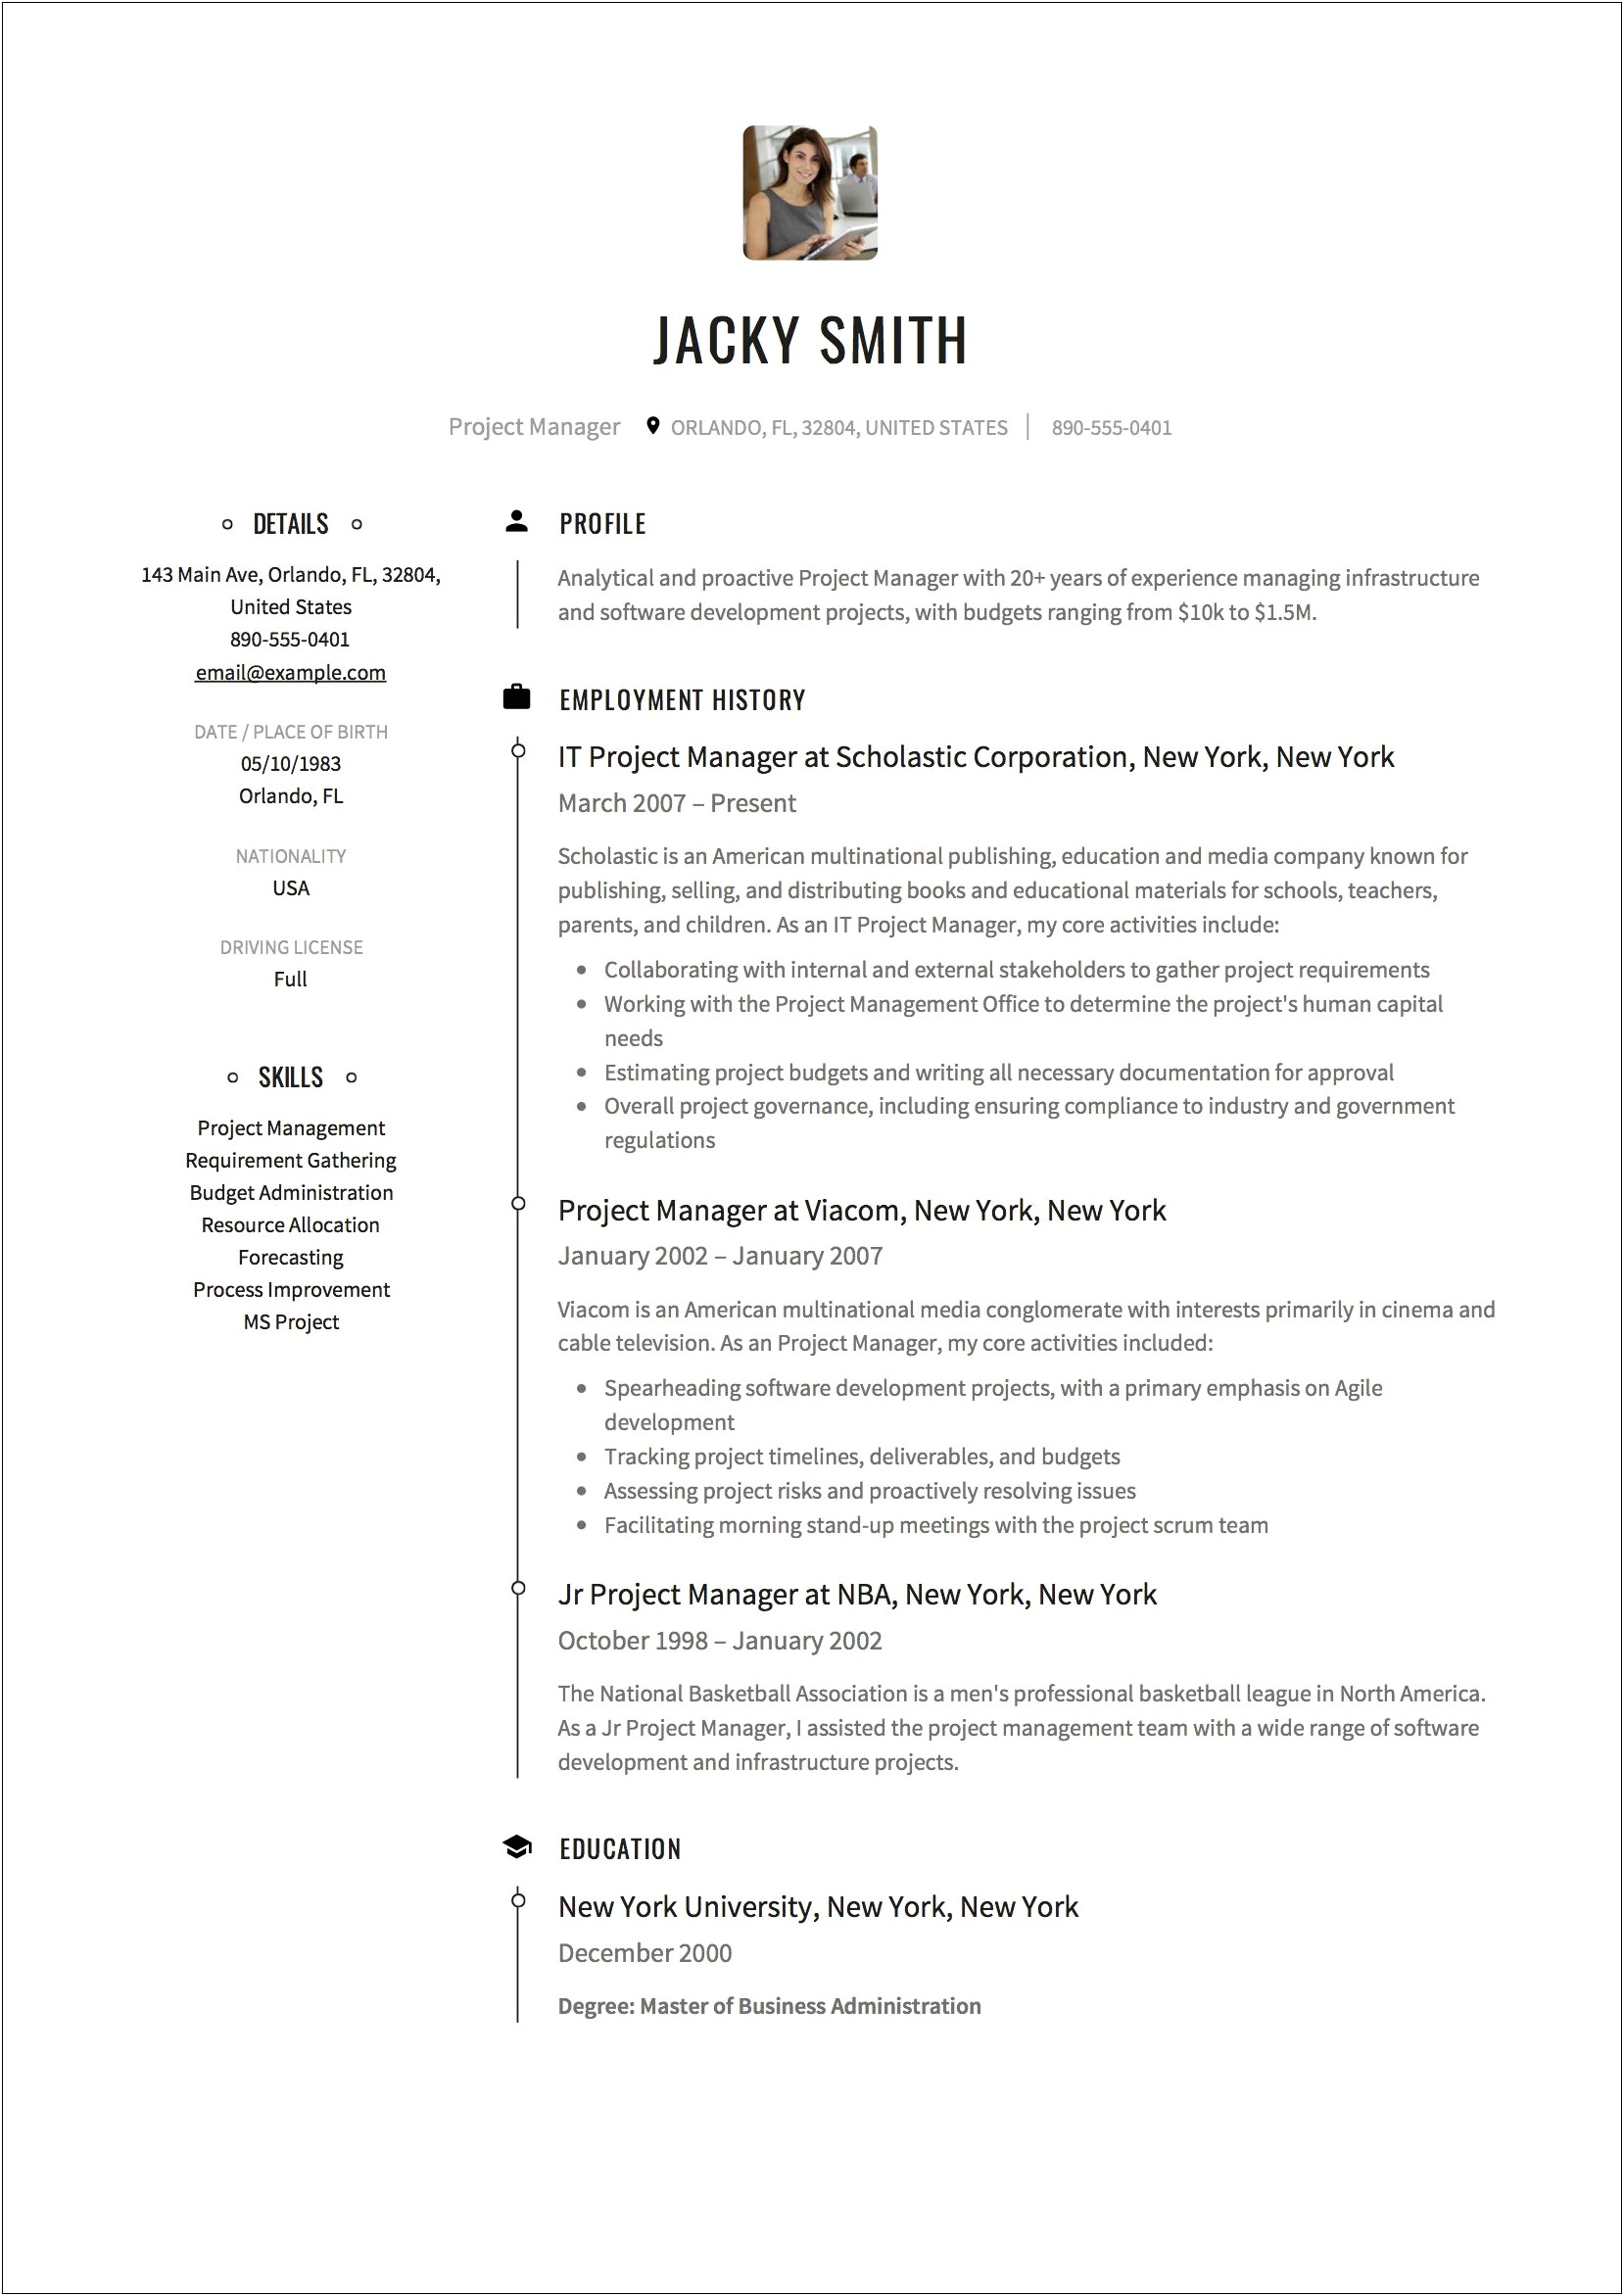 Resume Objective Statement Project Manager